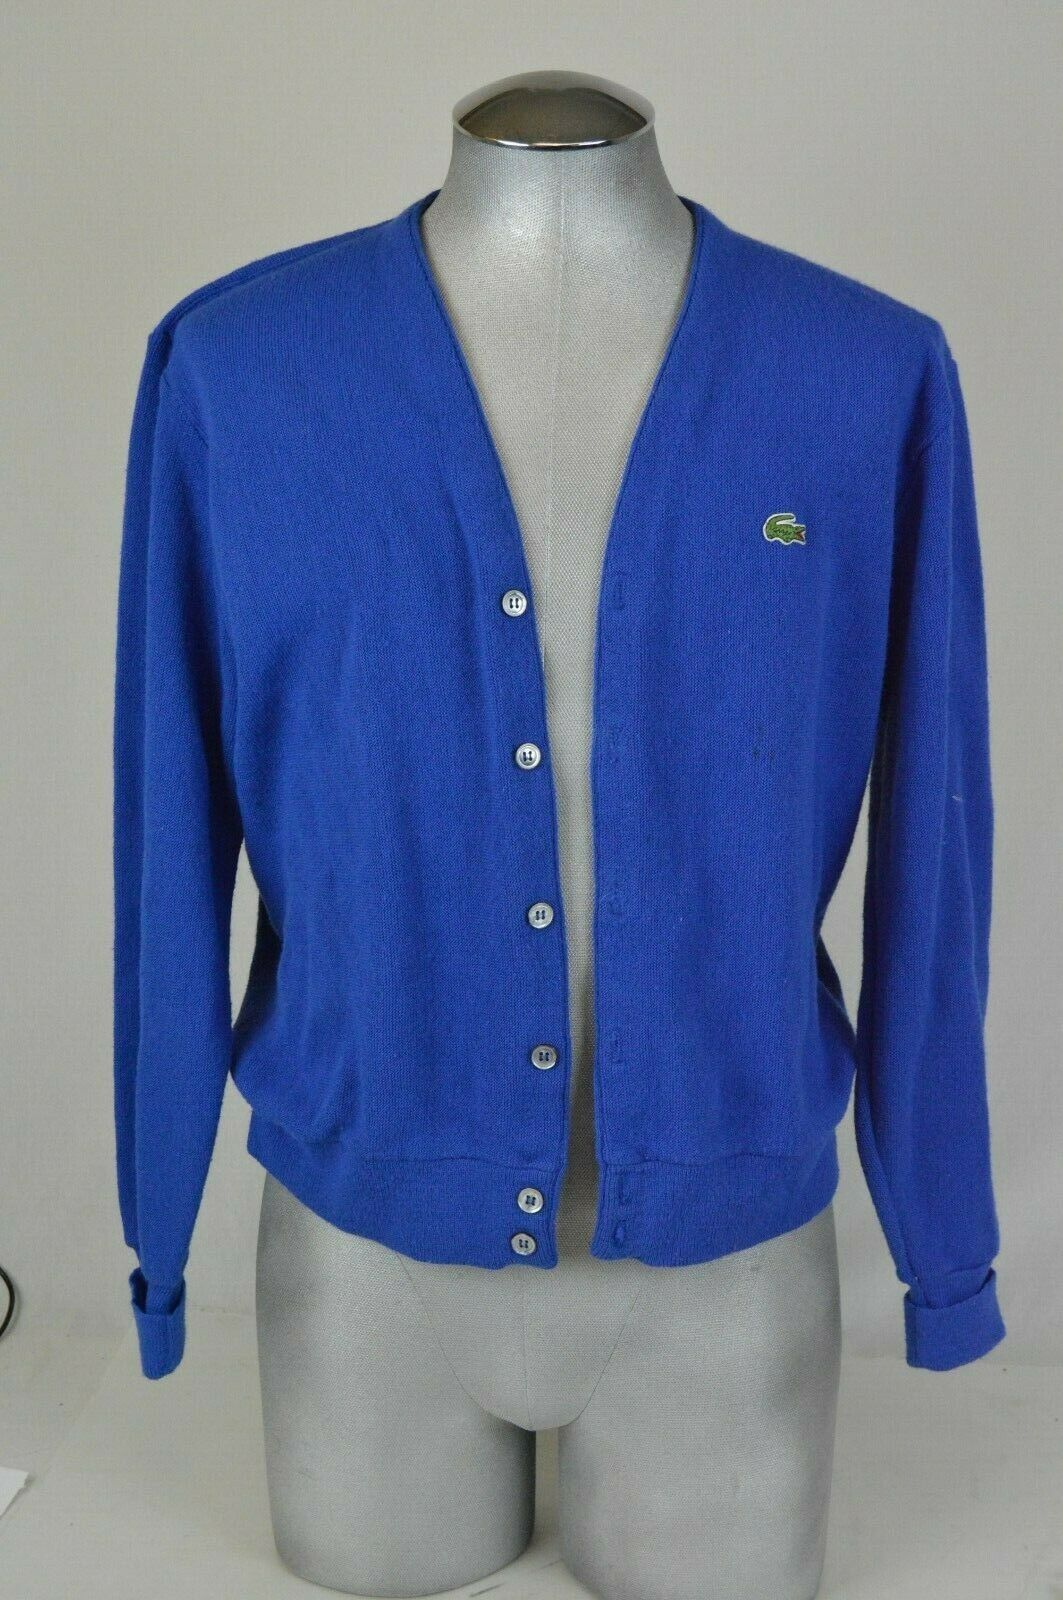 Vintage IZOD Lacoste Cardigan Sweater Button Down Long Sleeve Blue Mens ...